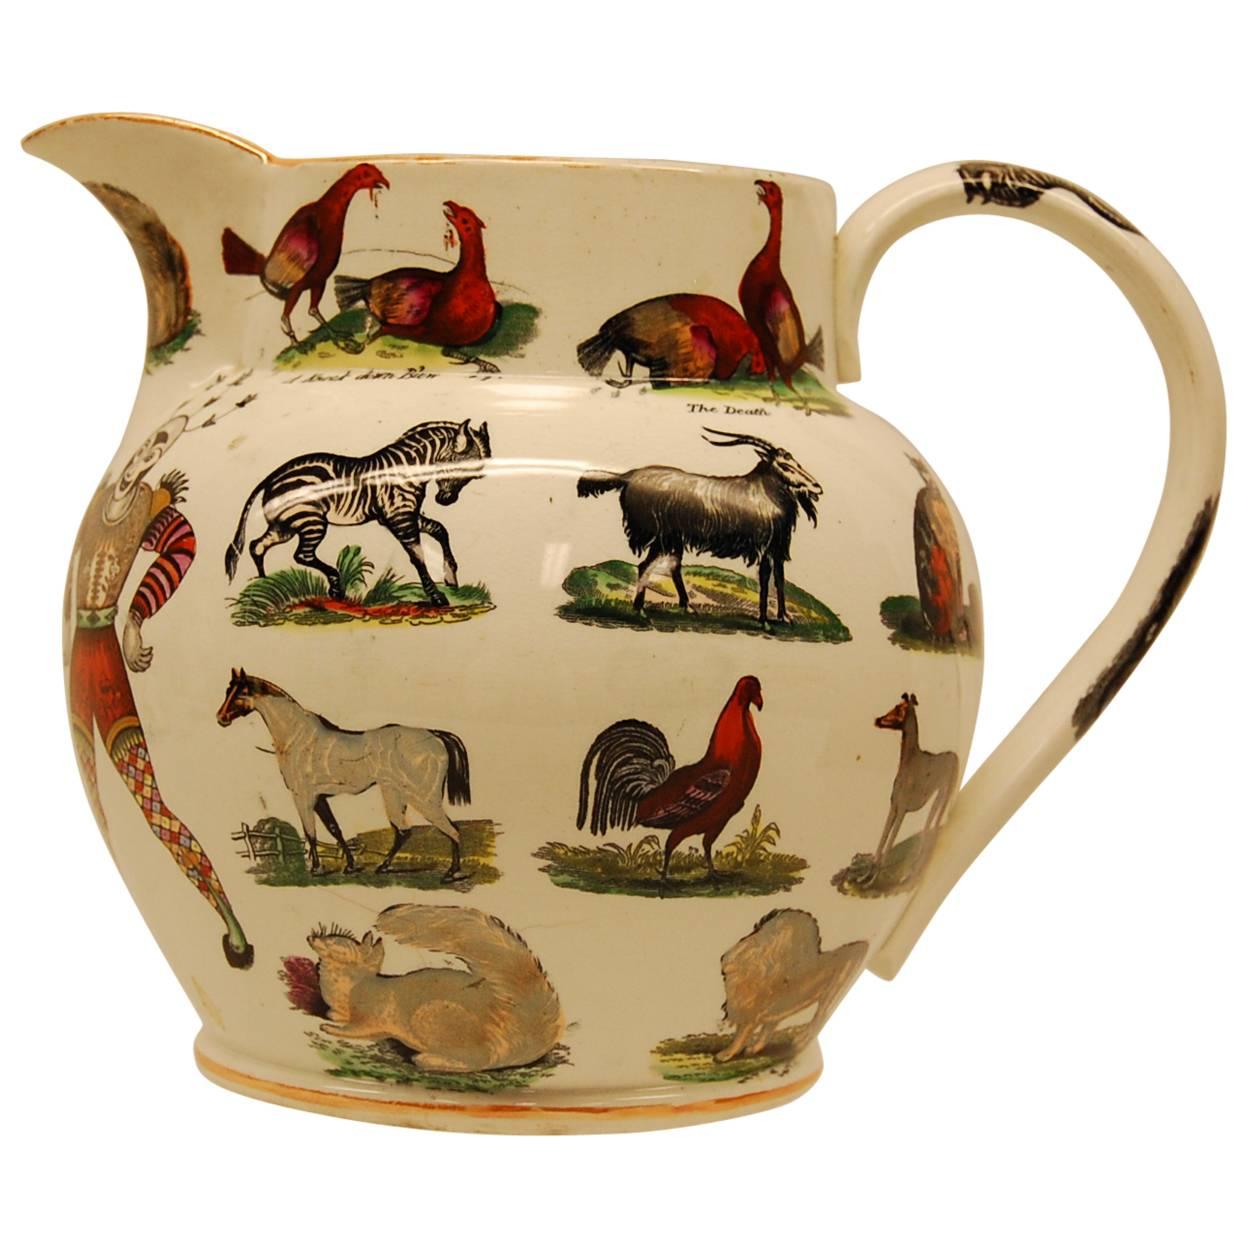 Rare Elsmore & Forster Ironstone Ale Jug with Exotic Animal Transferware C. 1850 For Sale